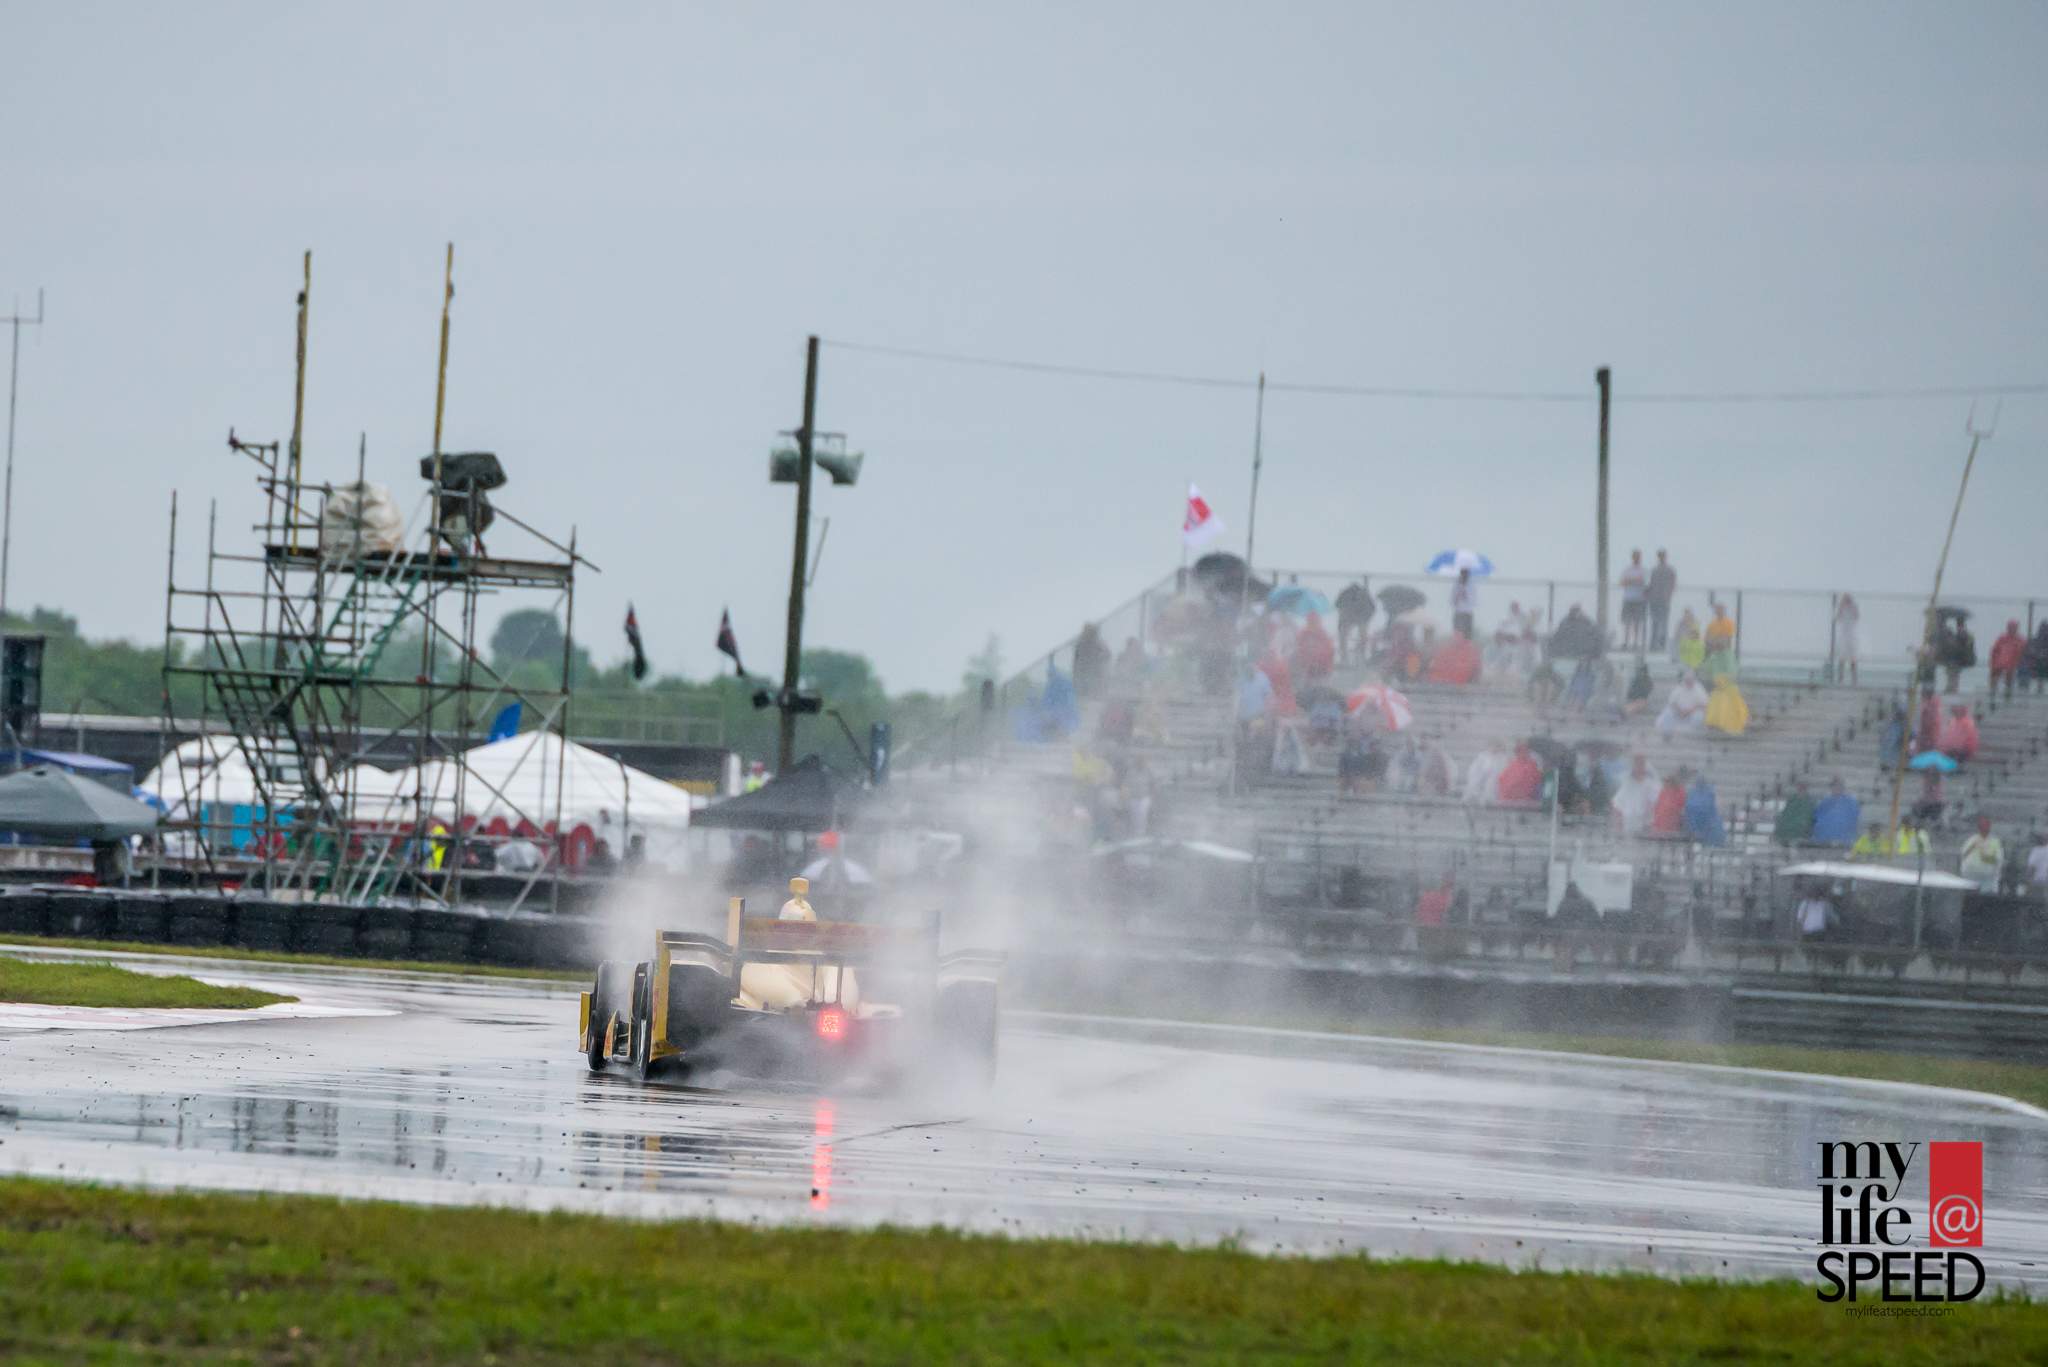 Ryan Hunter-Reay attacking the wet pavement.